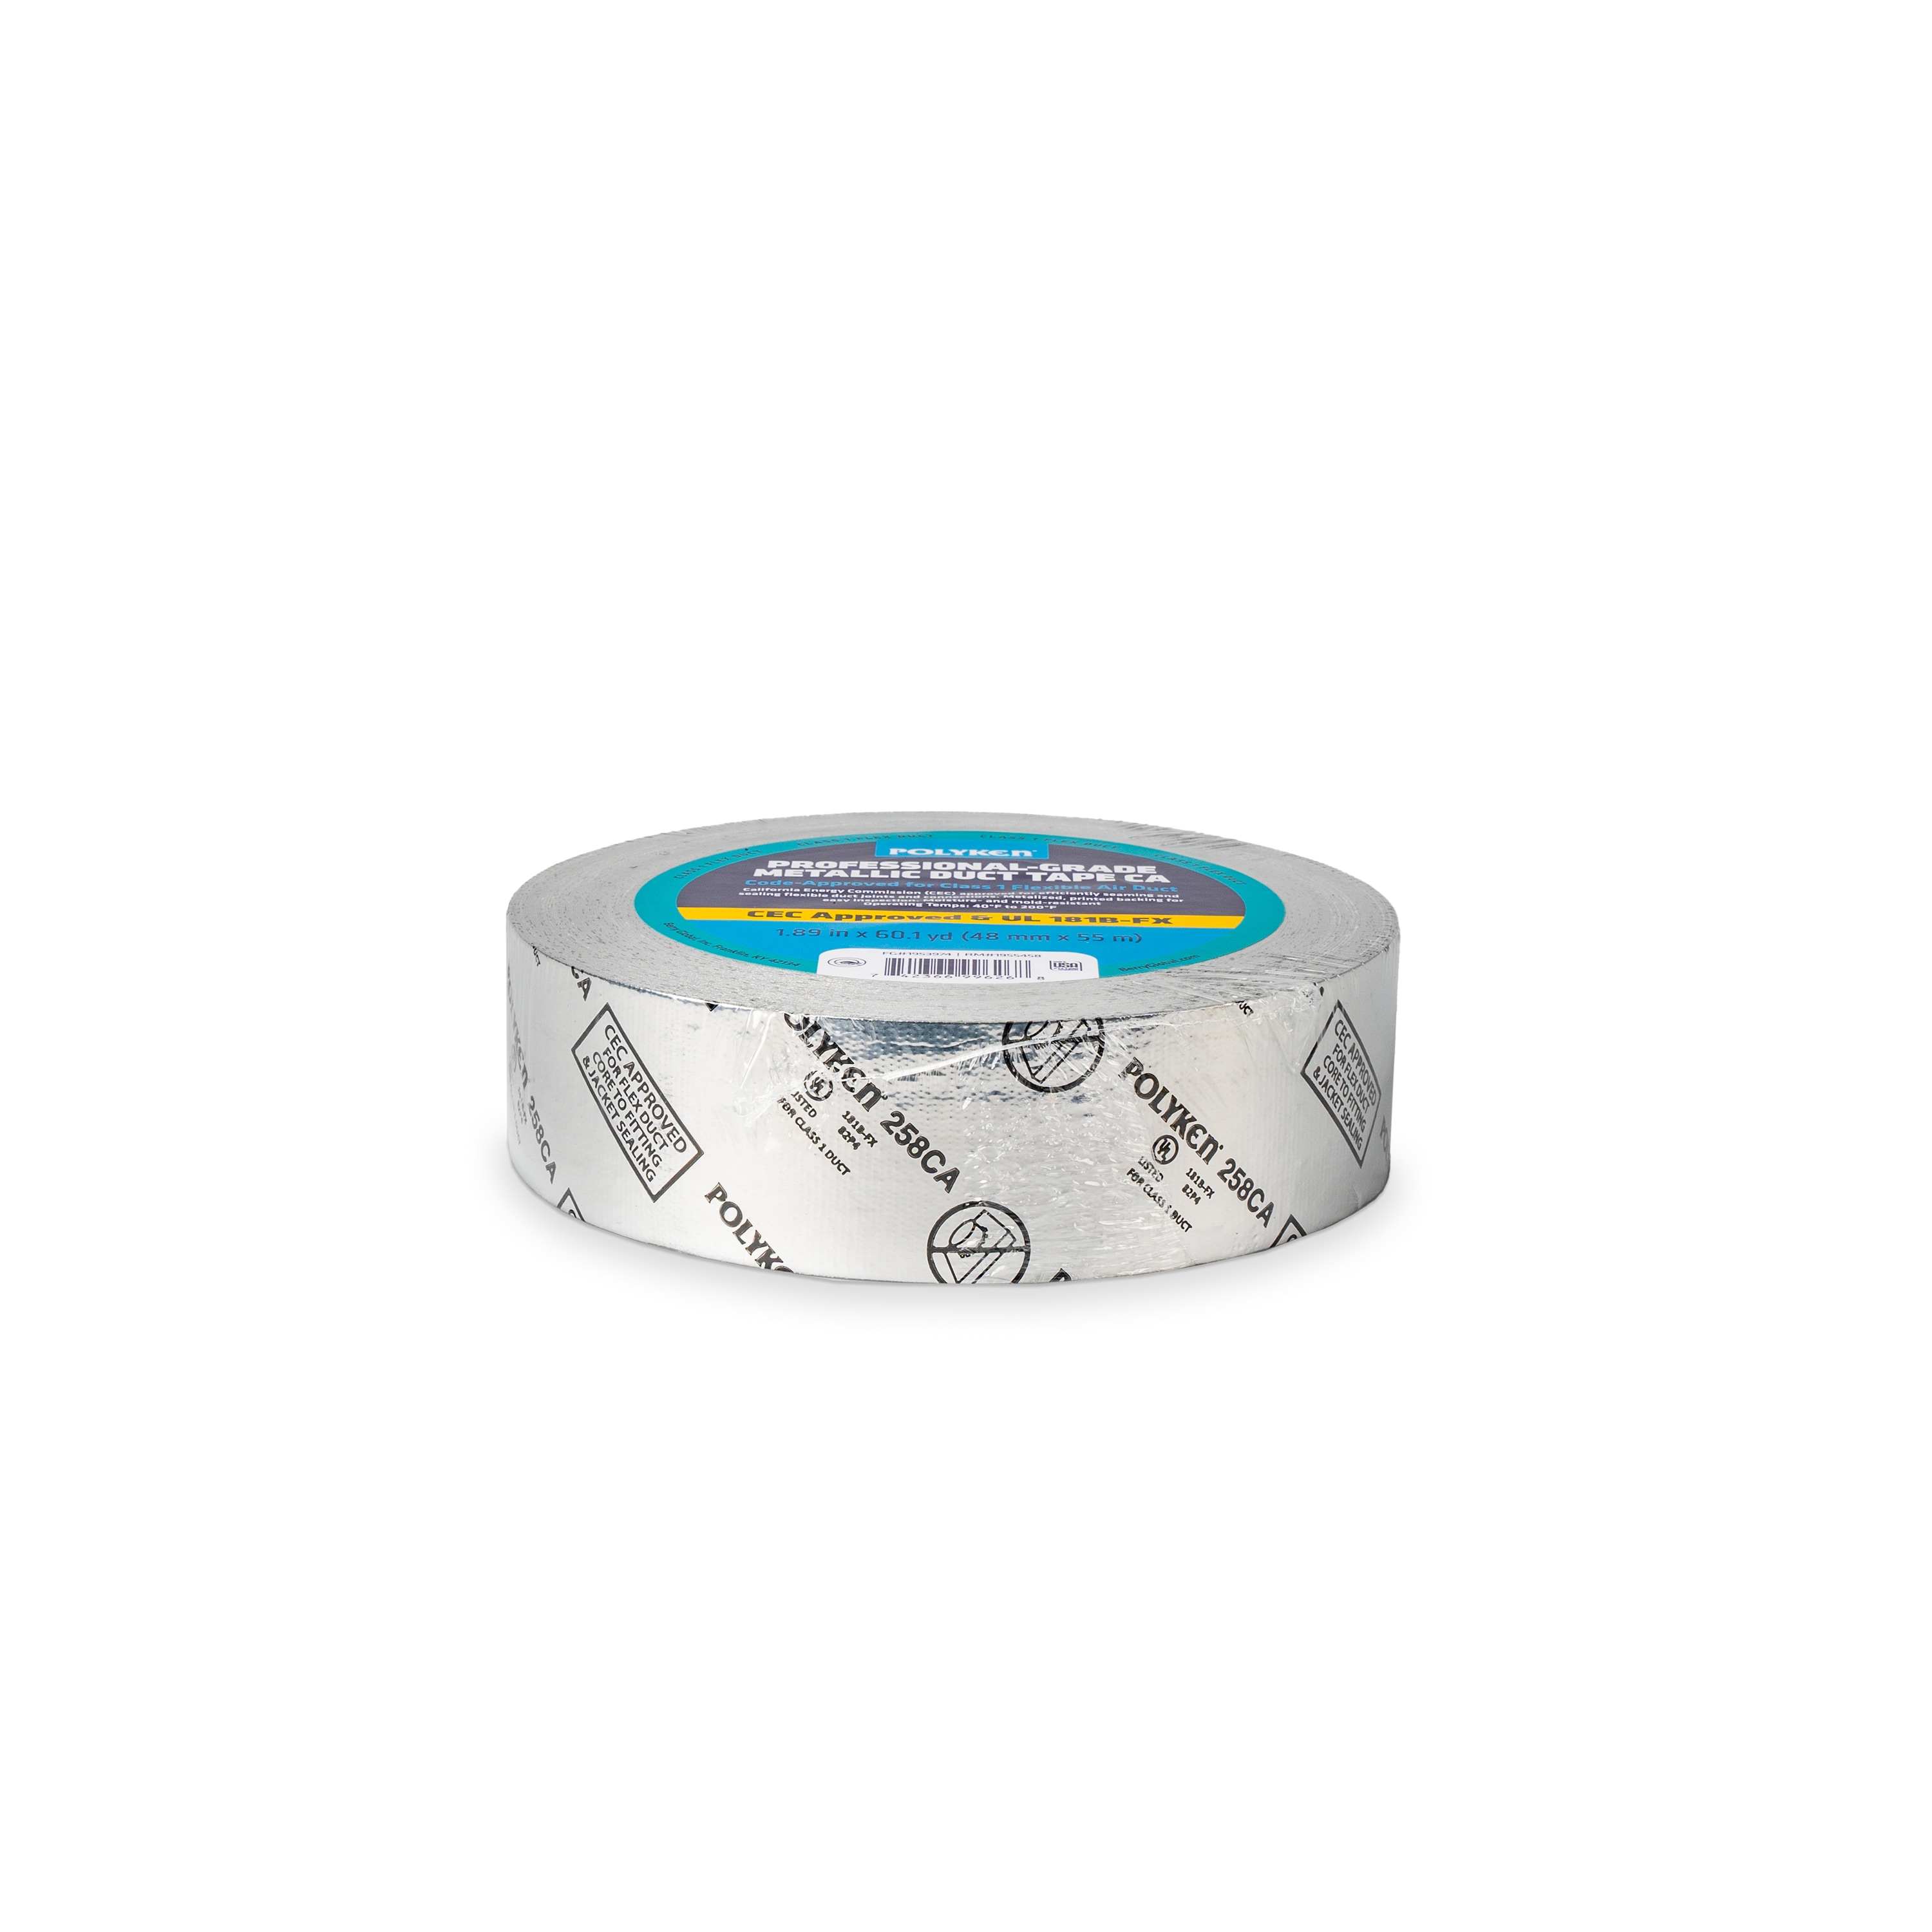 Duck Brand Advanced Strength 1.88 in x 45 yd Silver Duct Tape